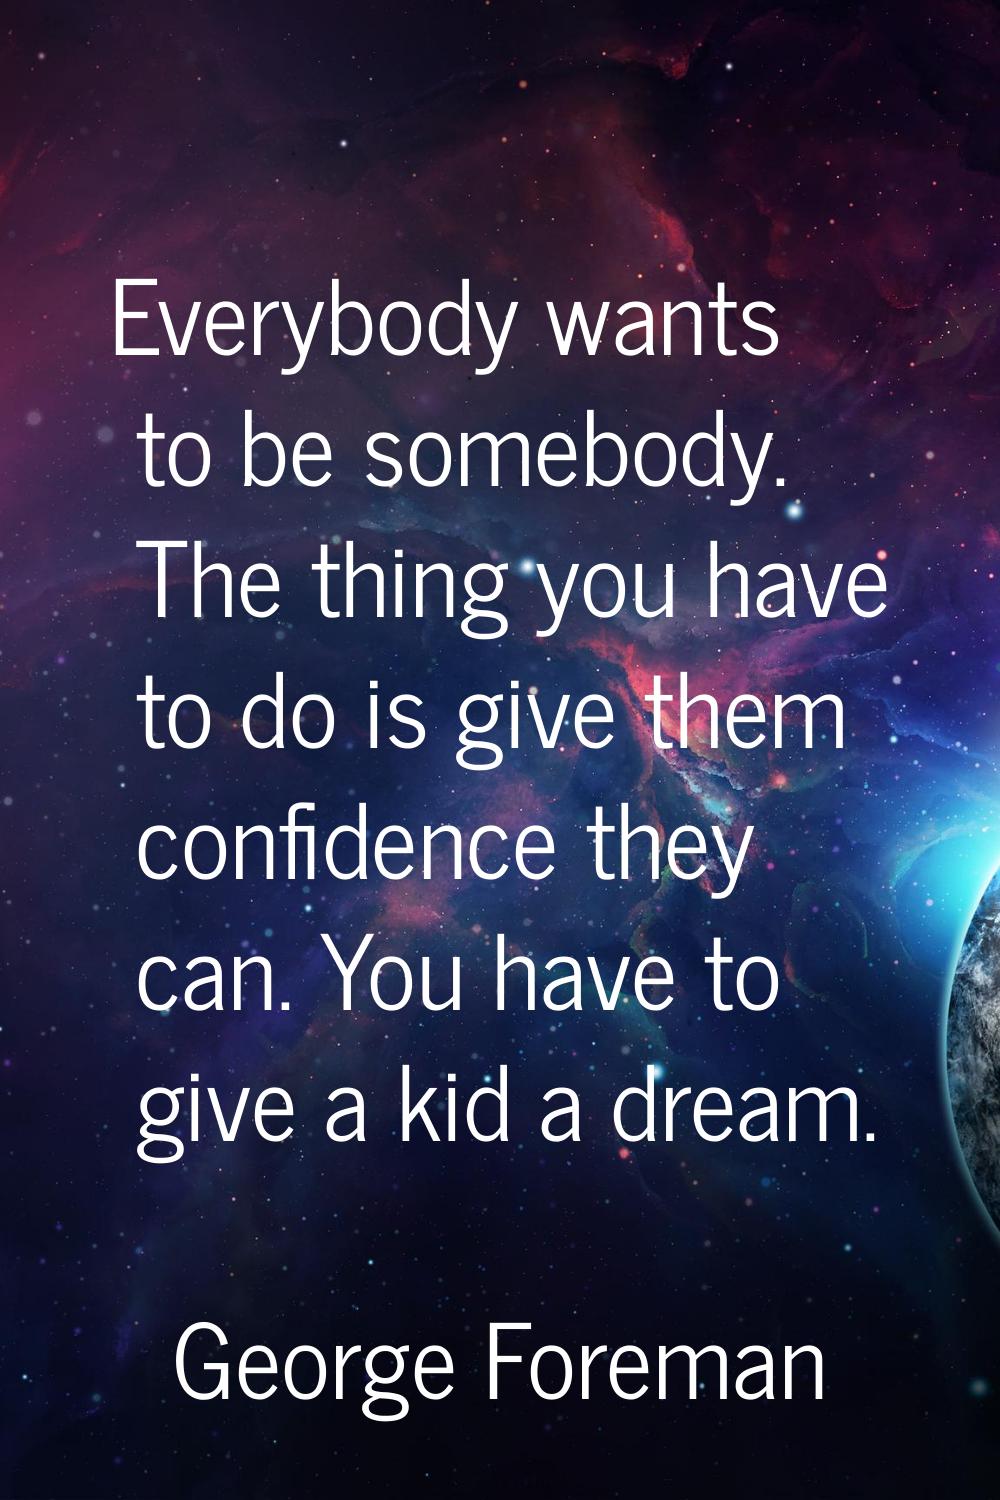 Everybody wants to be somebody. The thing you have to do is give them confidence they can. You have